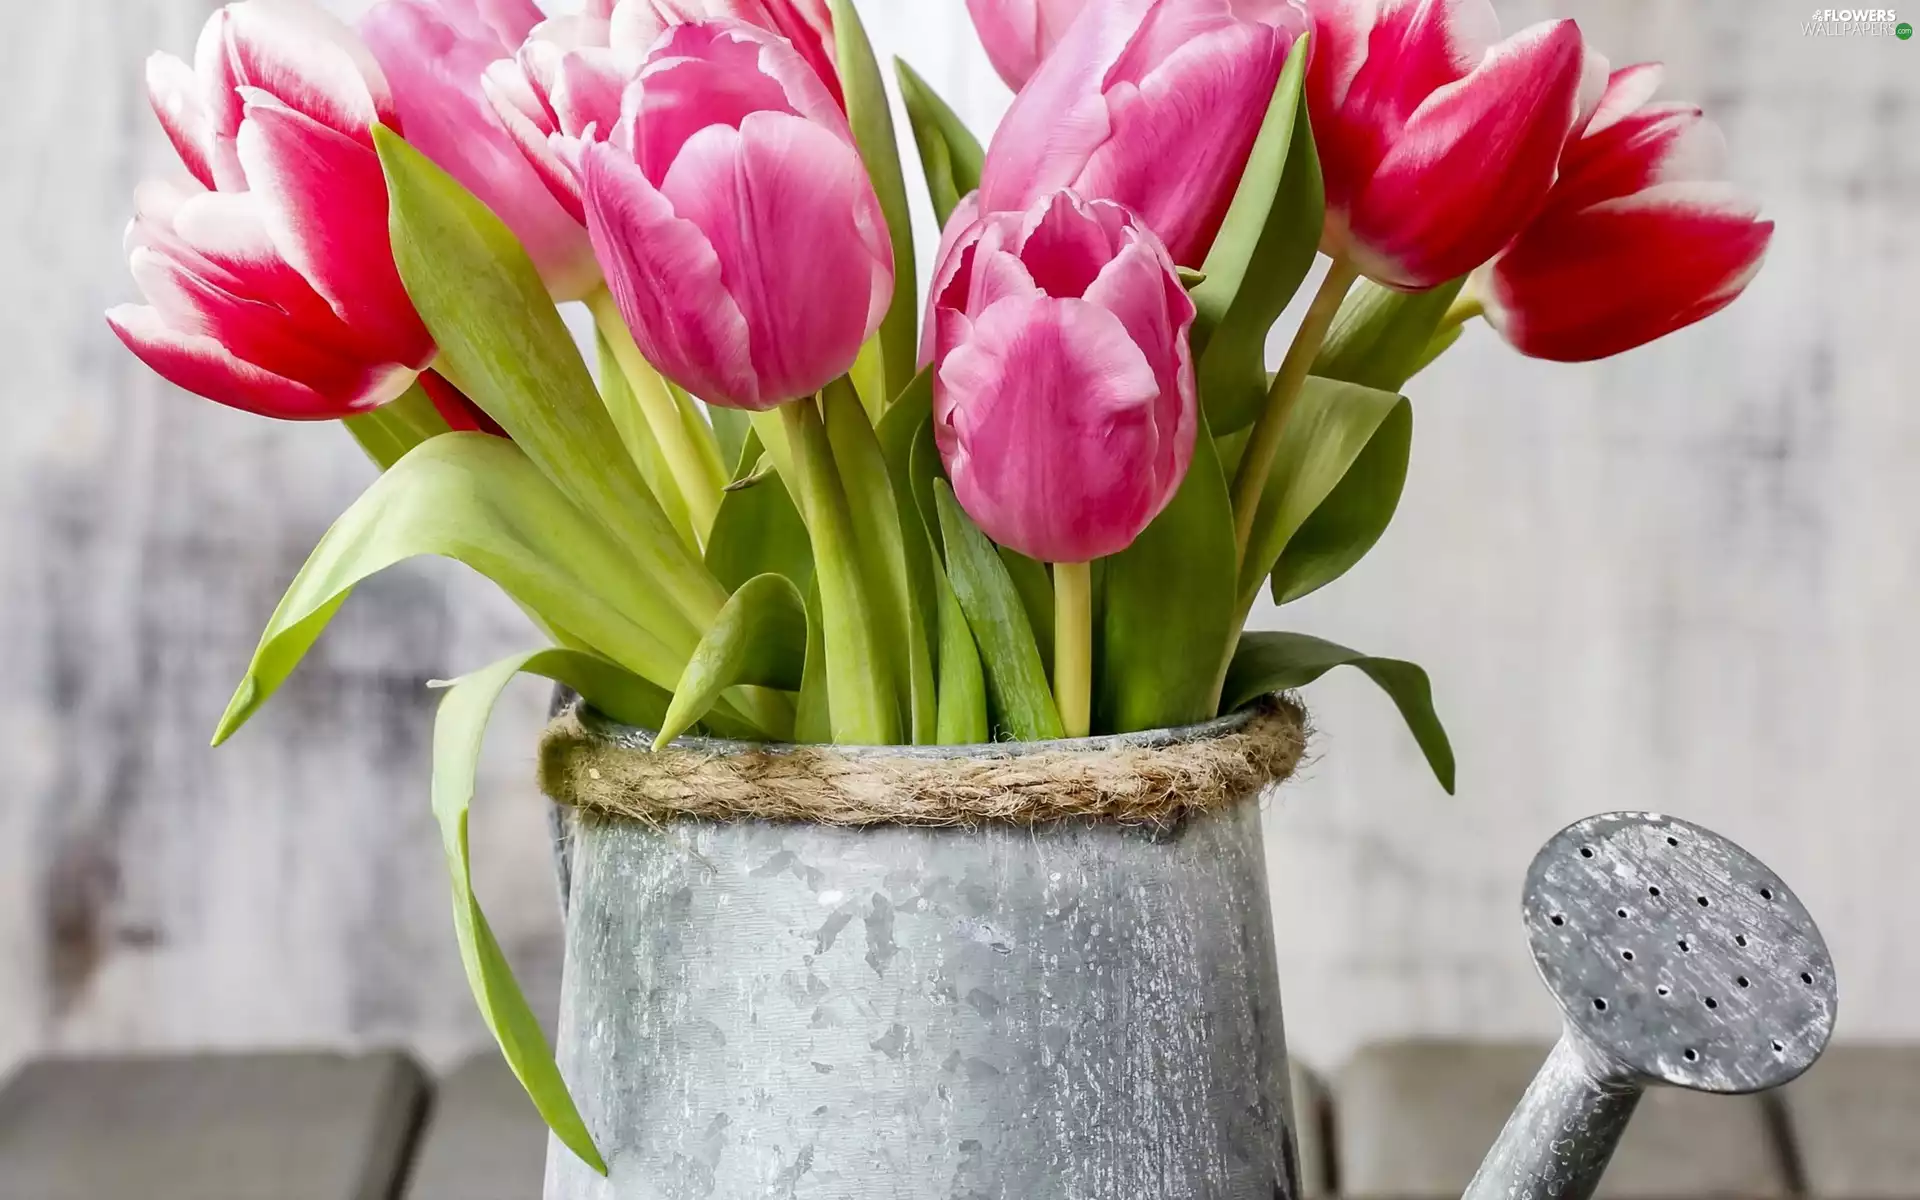 Flowers, Tulips, Watering Can, bouquet